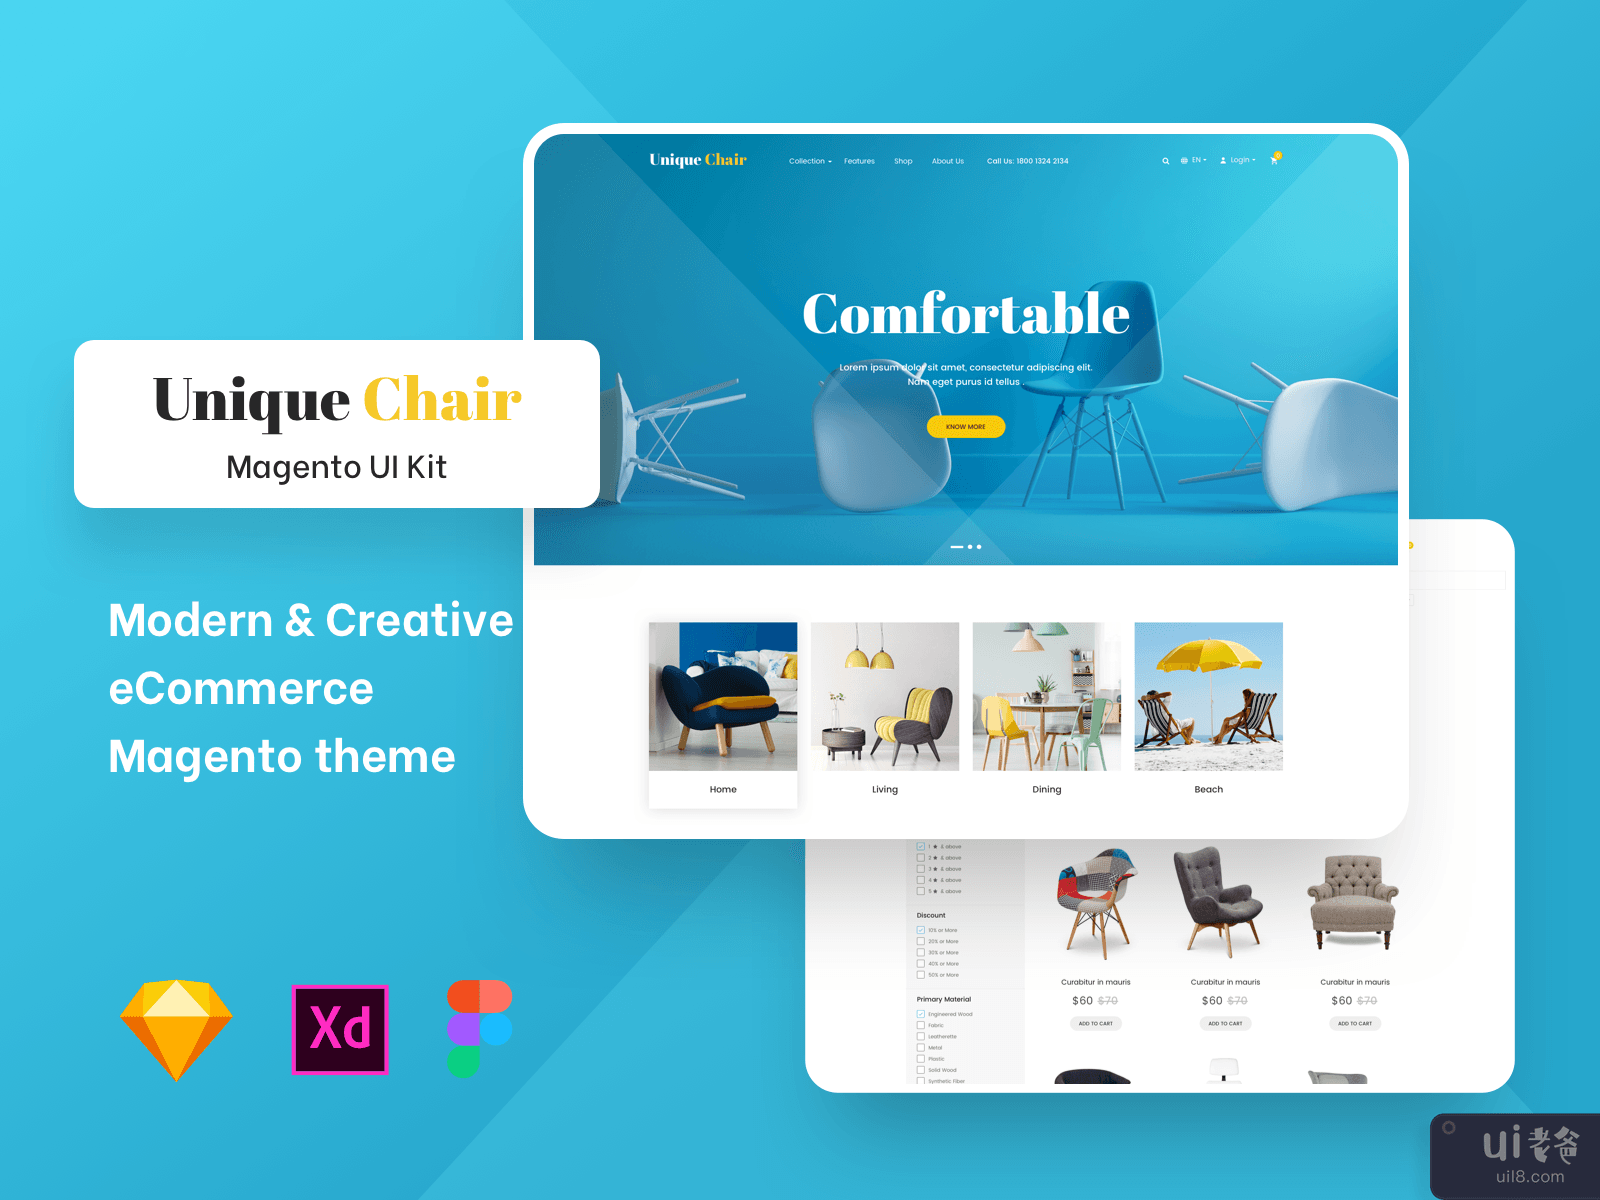 Unique Chairs Store Magento Based UI